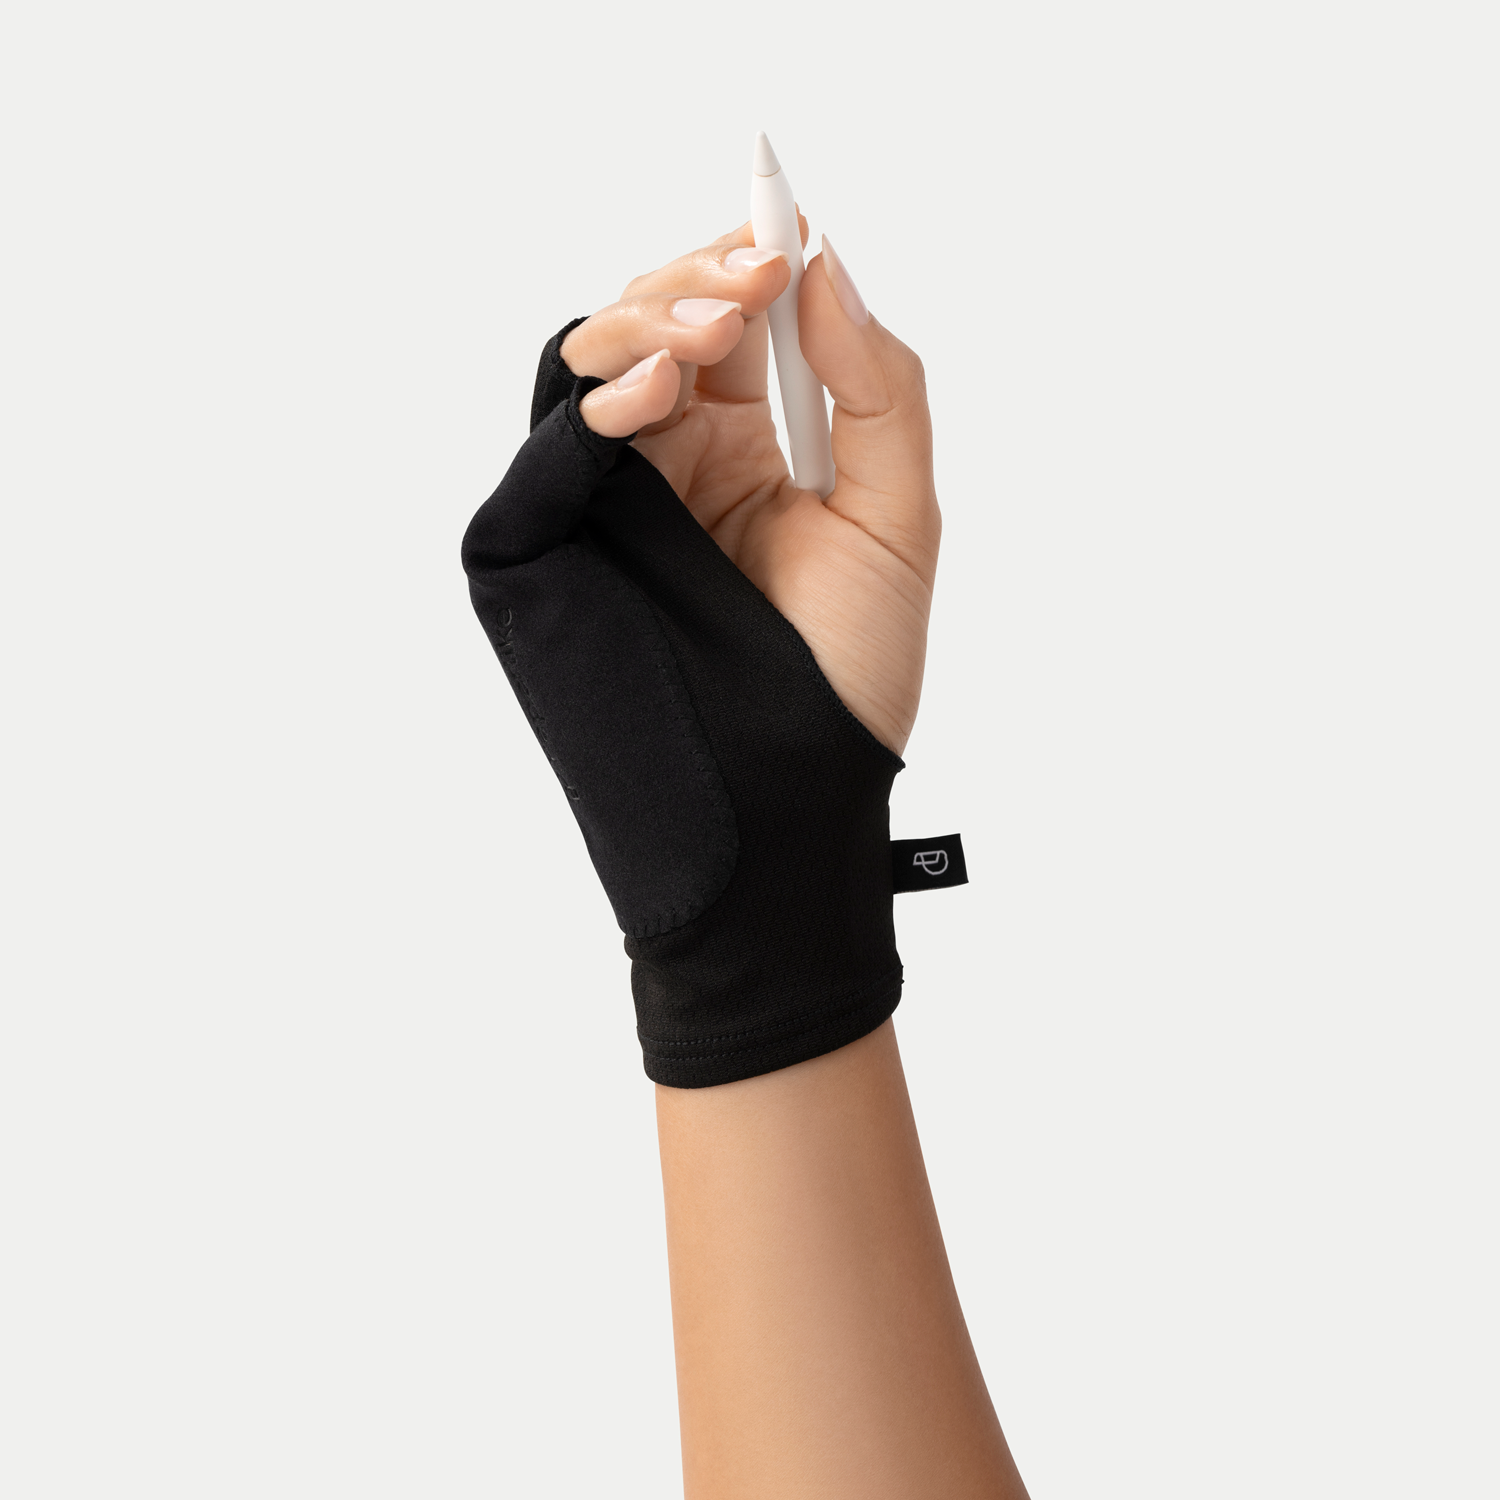 Paperlike's Drawing Glove is a fingerless design so you can maximize iPad functionality